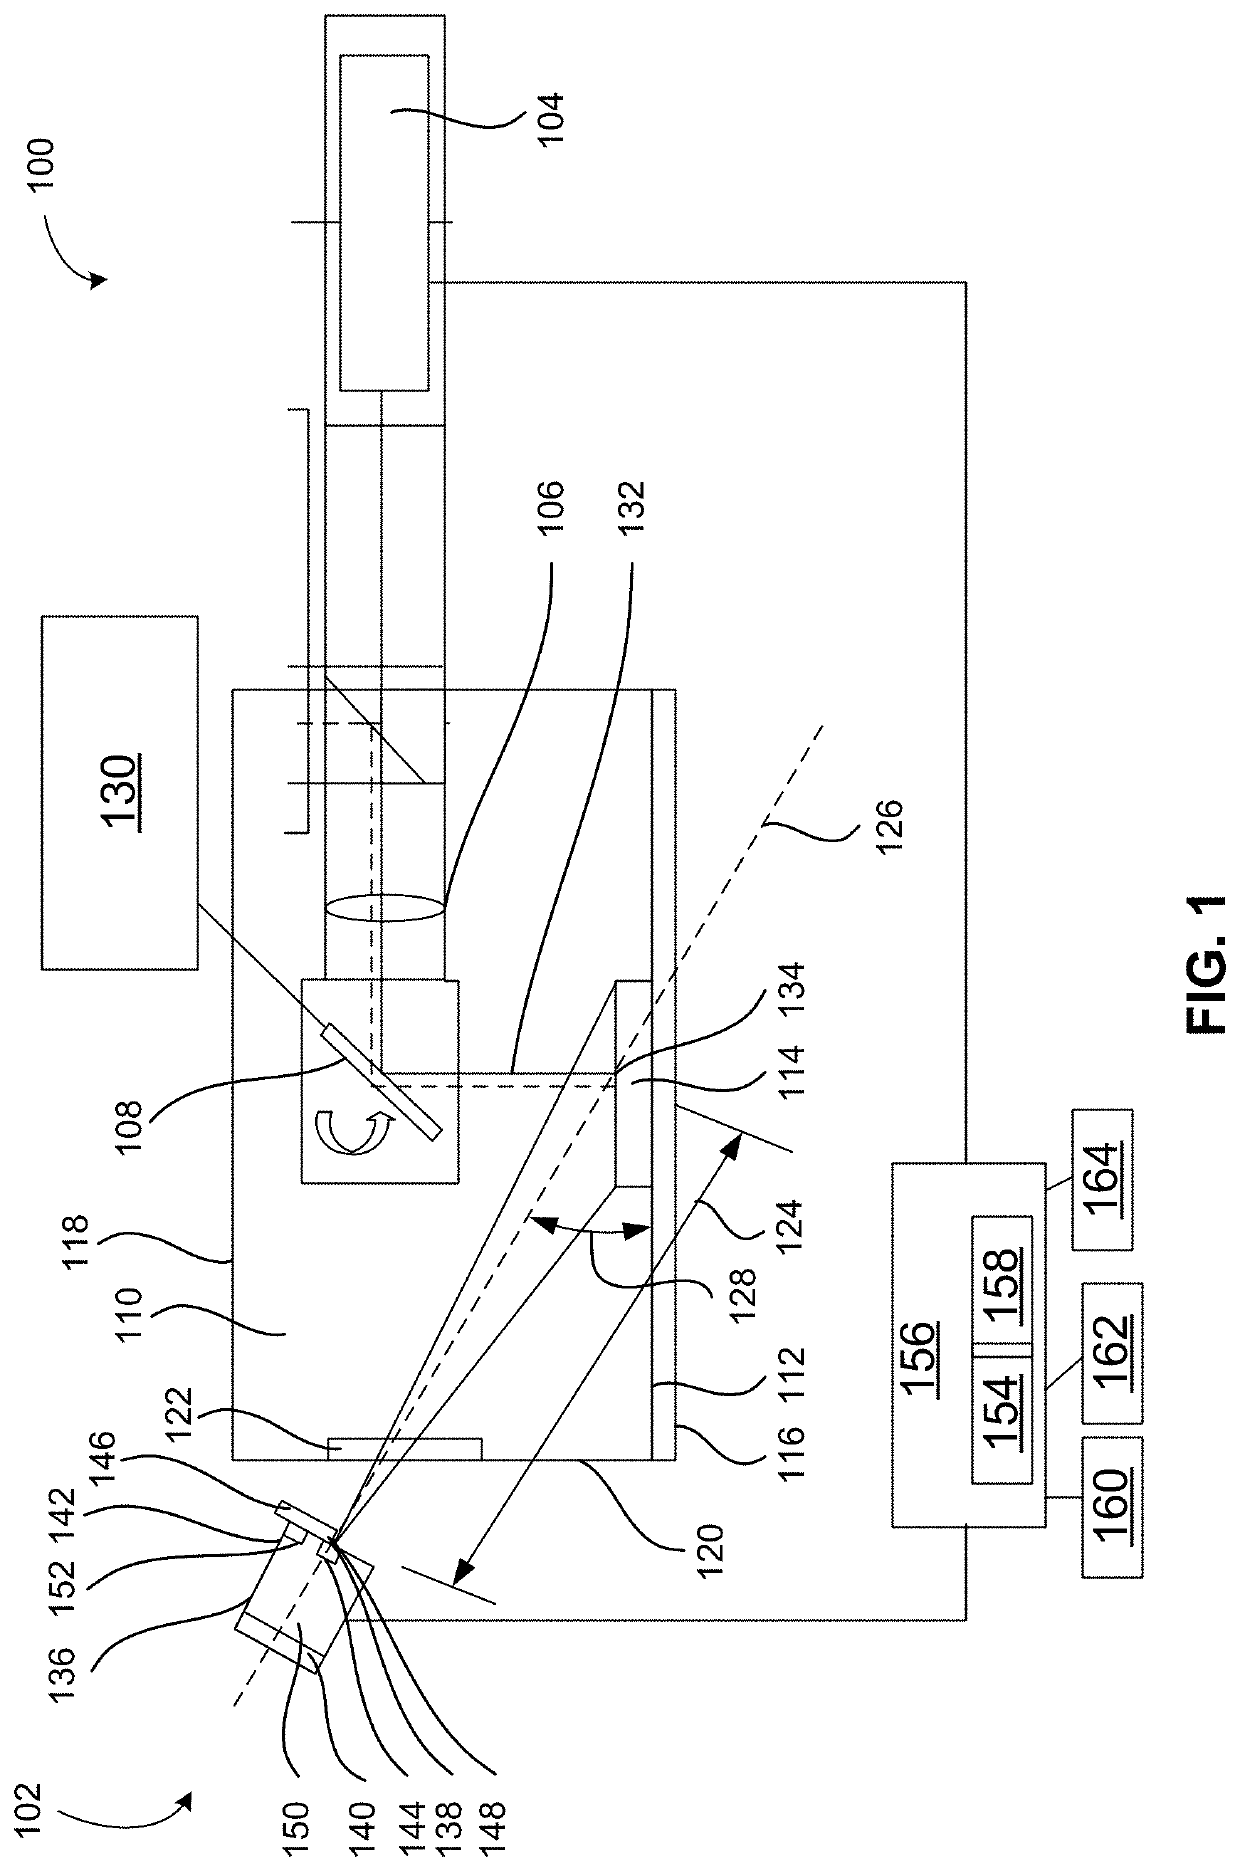 Systems and methods for compression, management, and analysis of downbeam camera data for an additive machine